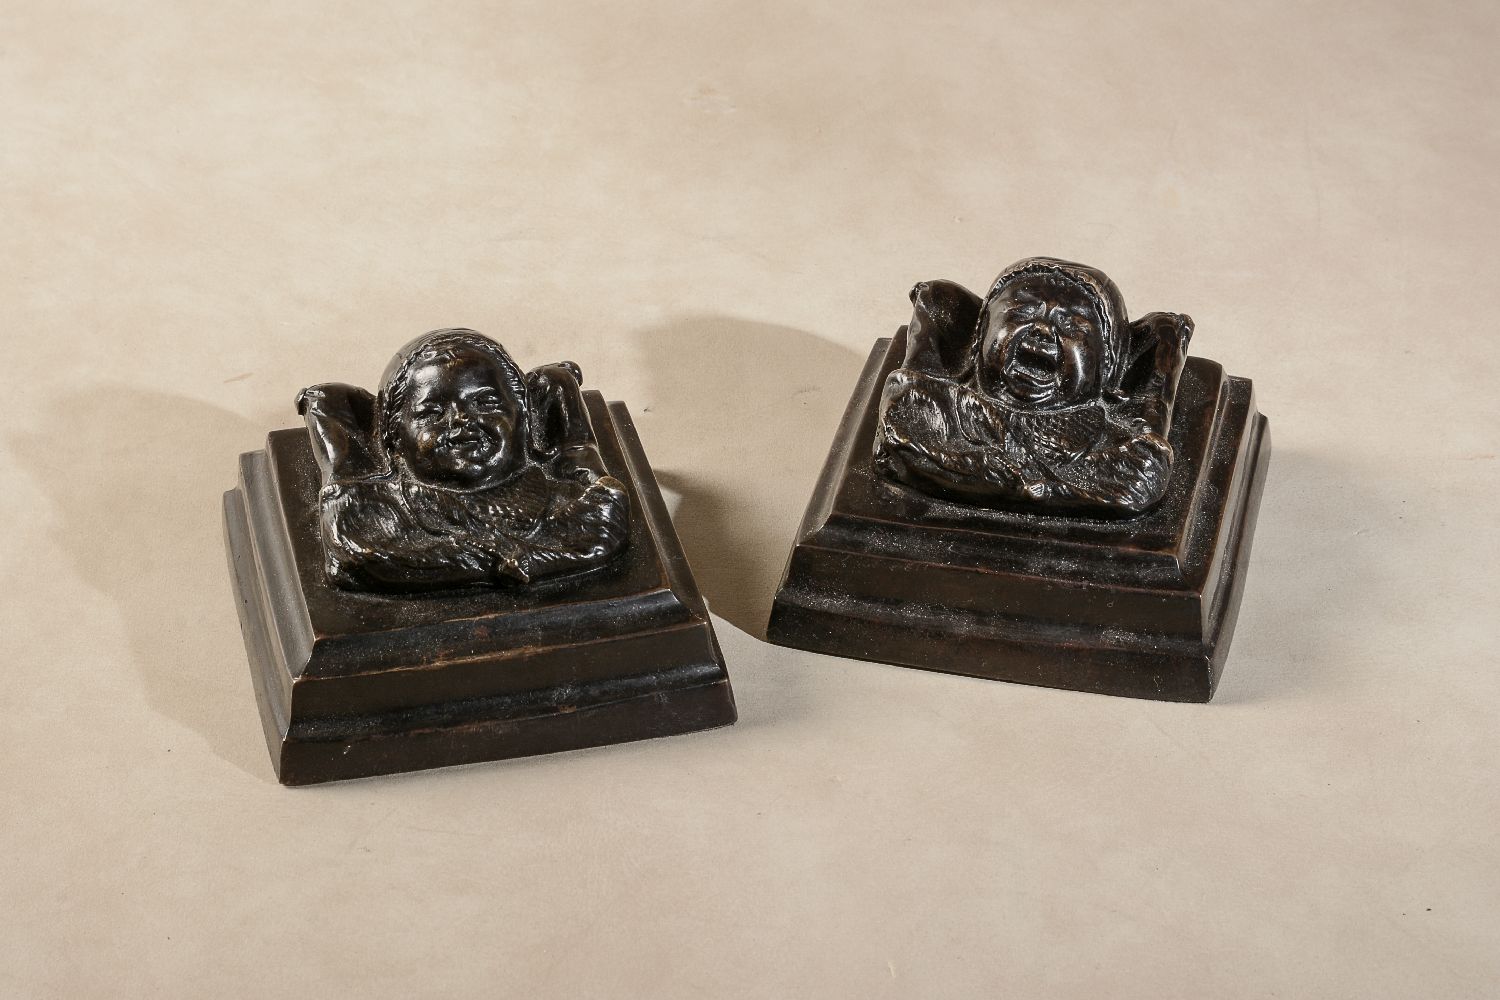 A pair of patinated bronze reliefs cast as infants' heads